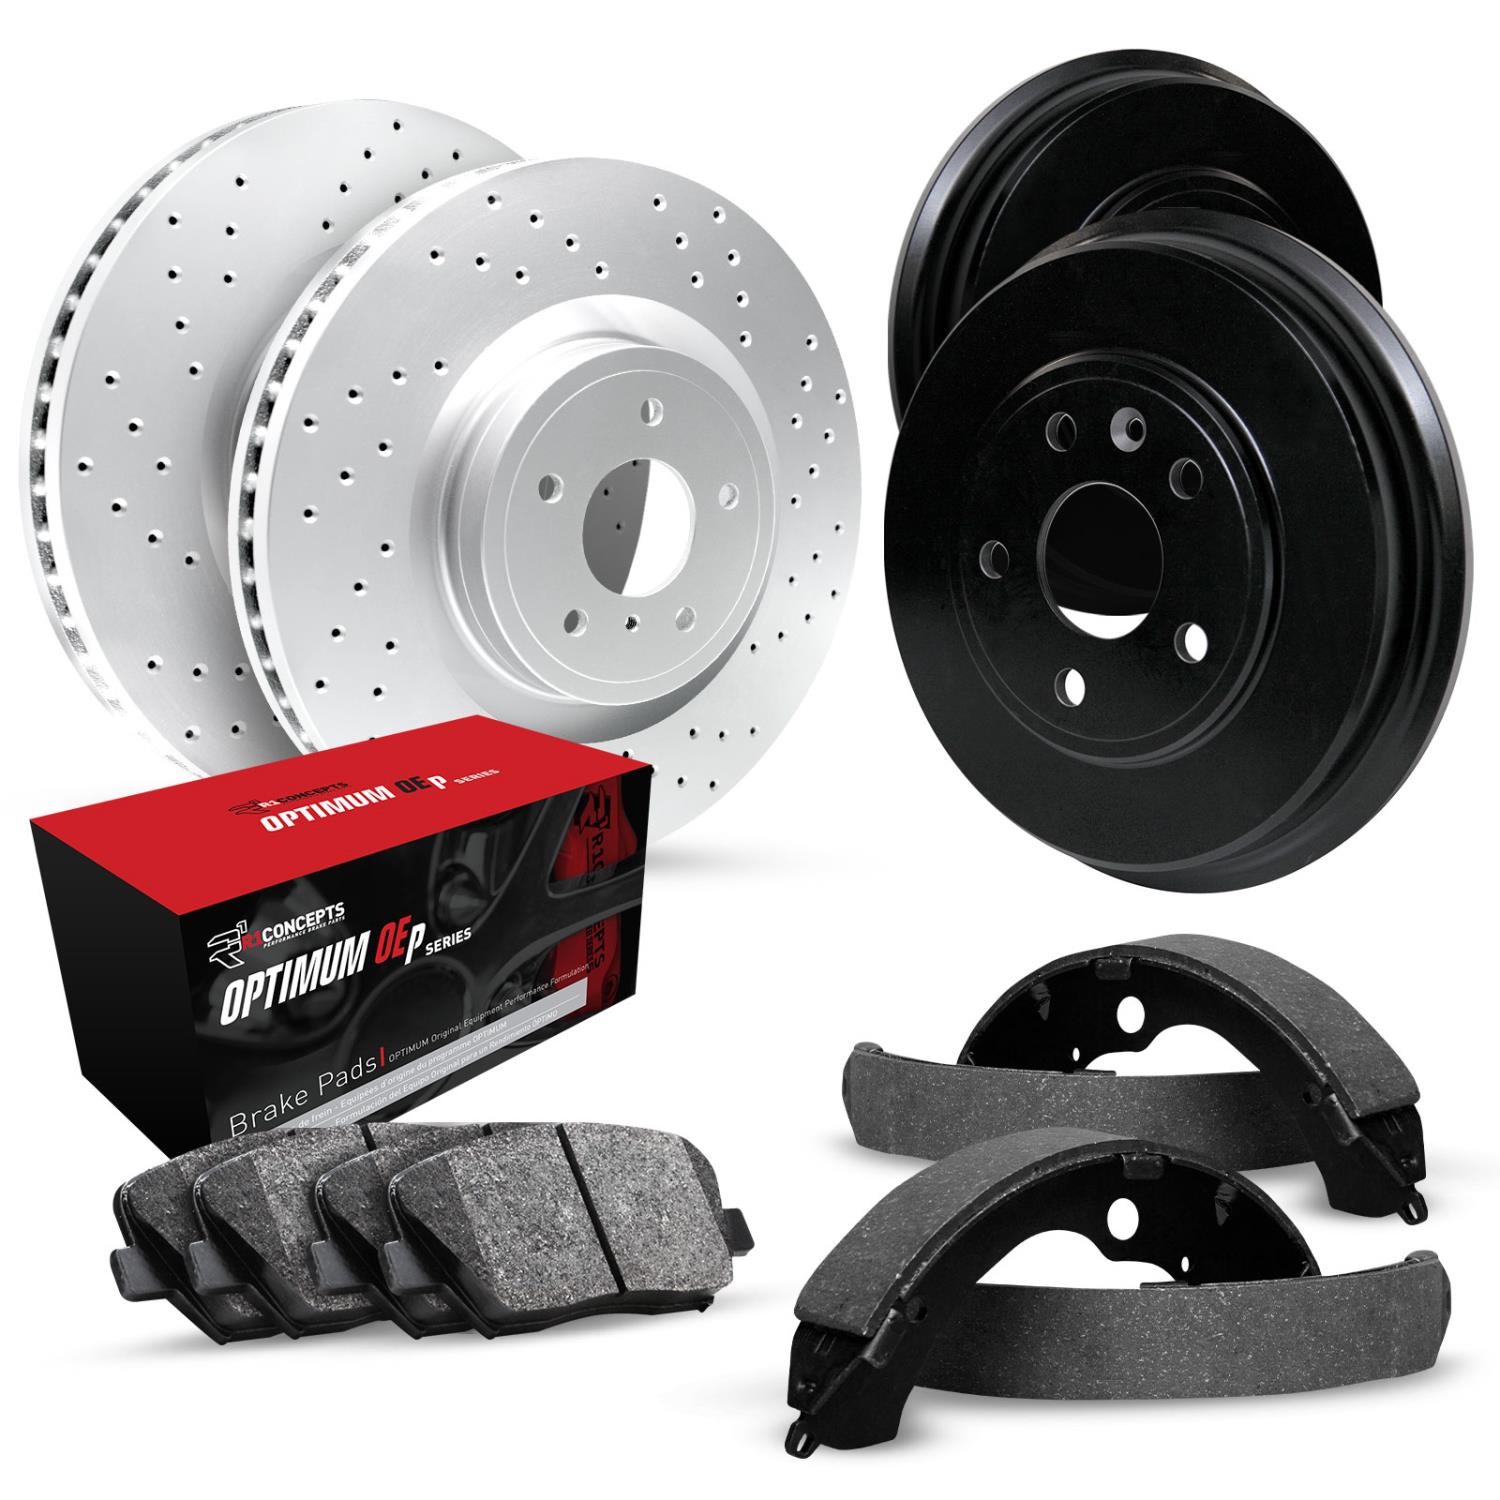 GEO-Carbon Drilled Brake Rotor & Drum Set w/Optimum OE Pads & Shoes, 1981-1992 GM, Position: Front & Rear